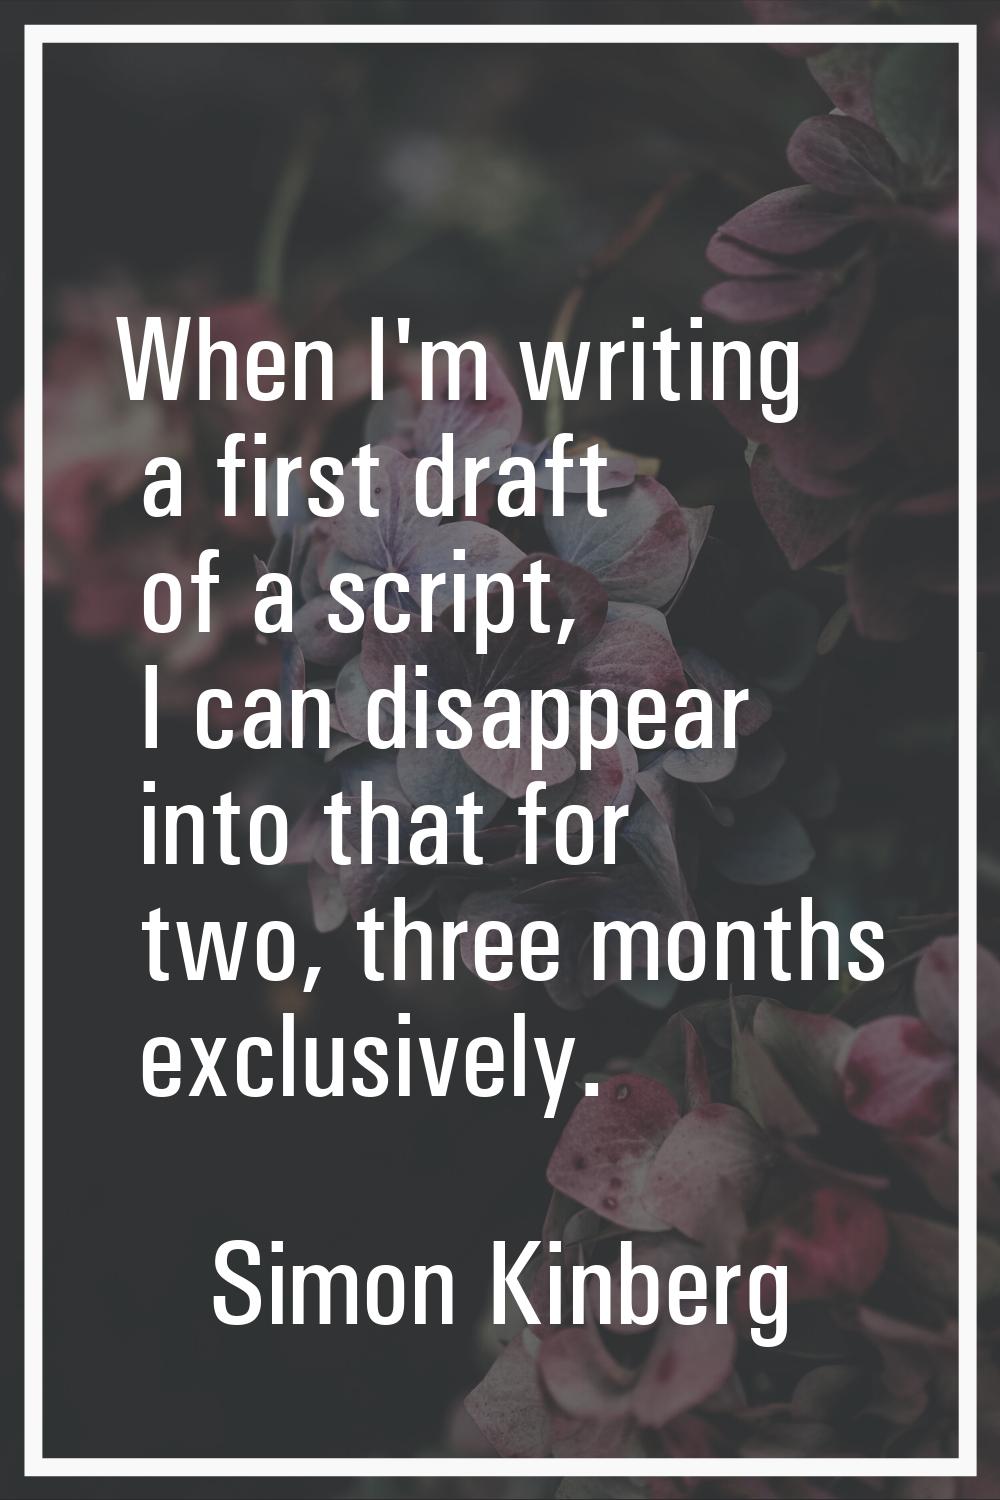 When I'm writing a first draft of a script, I can disappear into that for two, three months exclusi